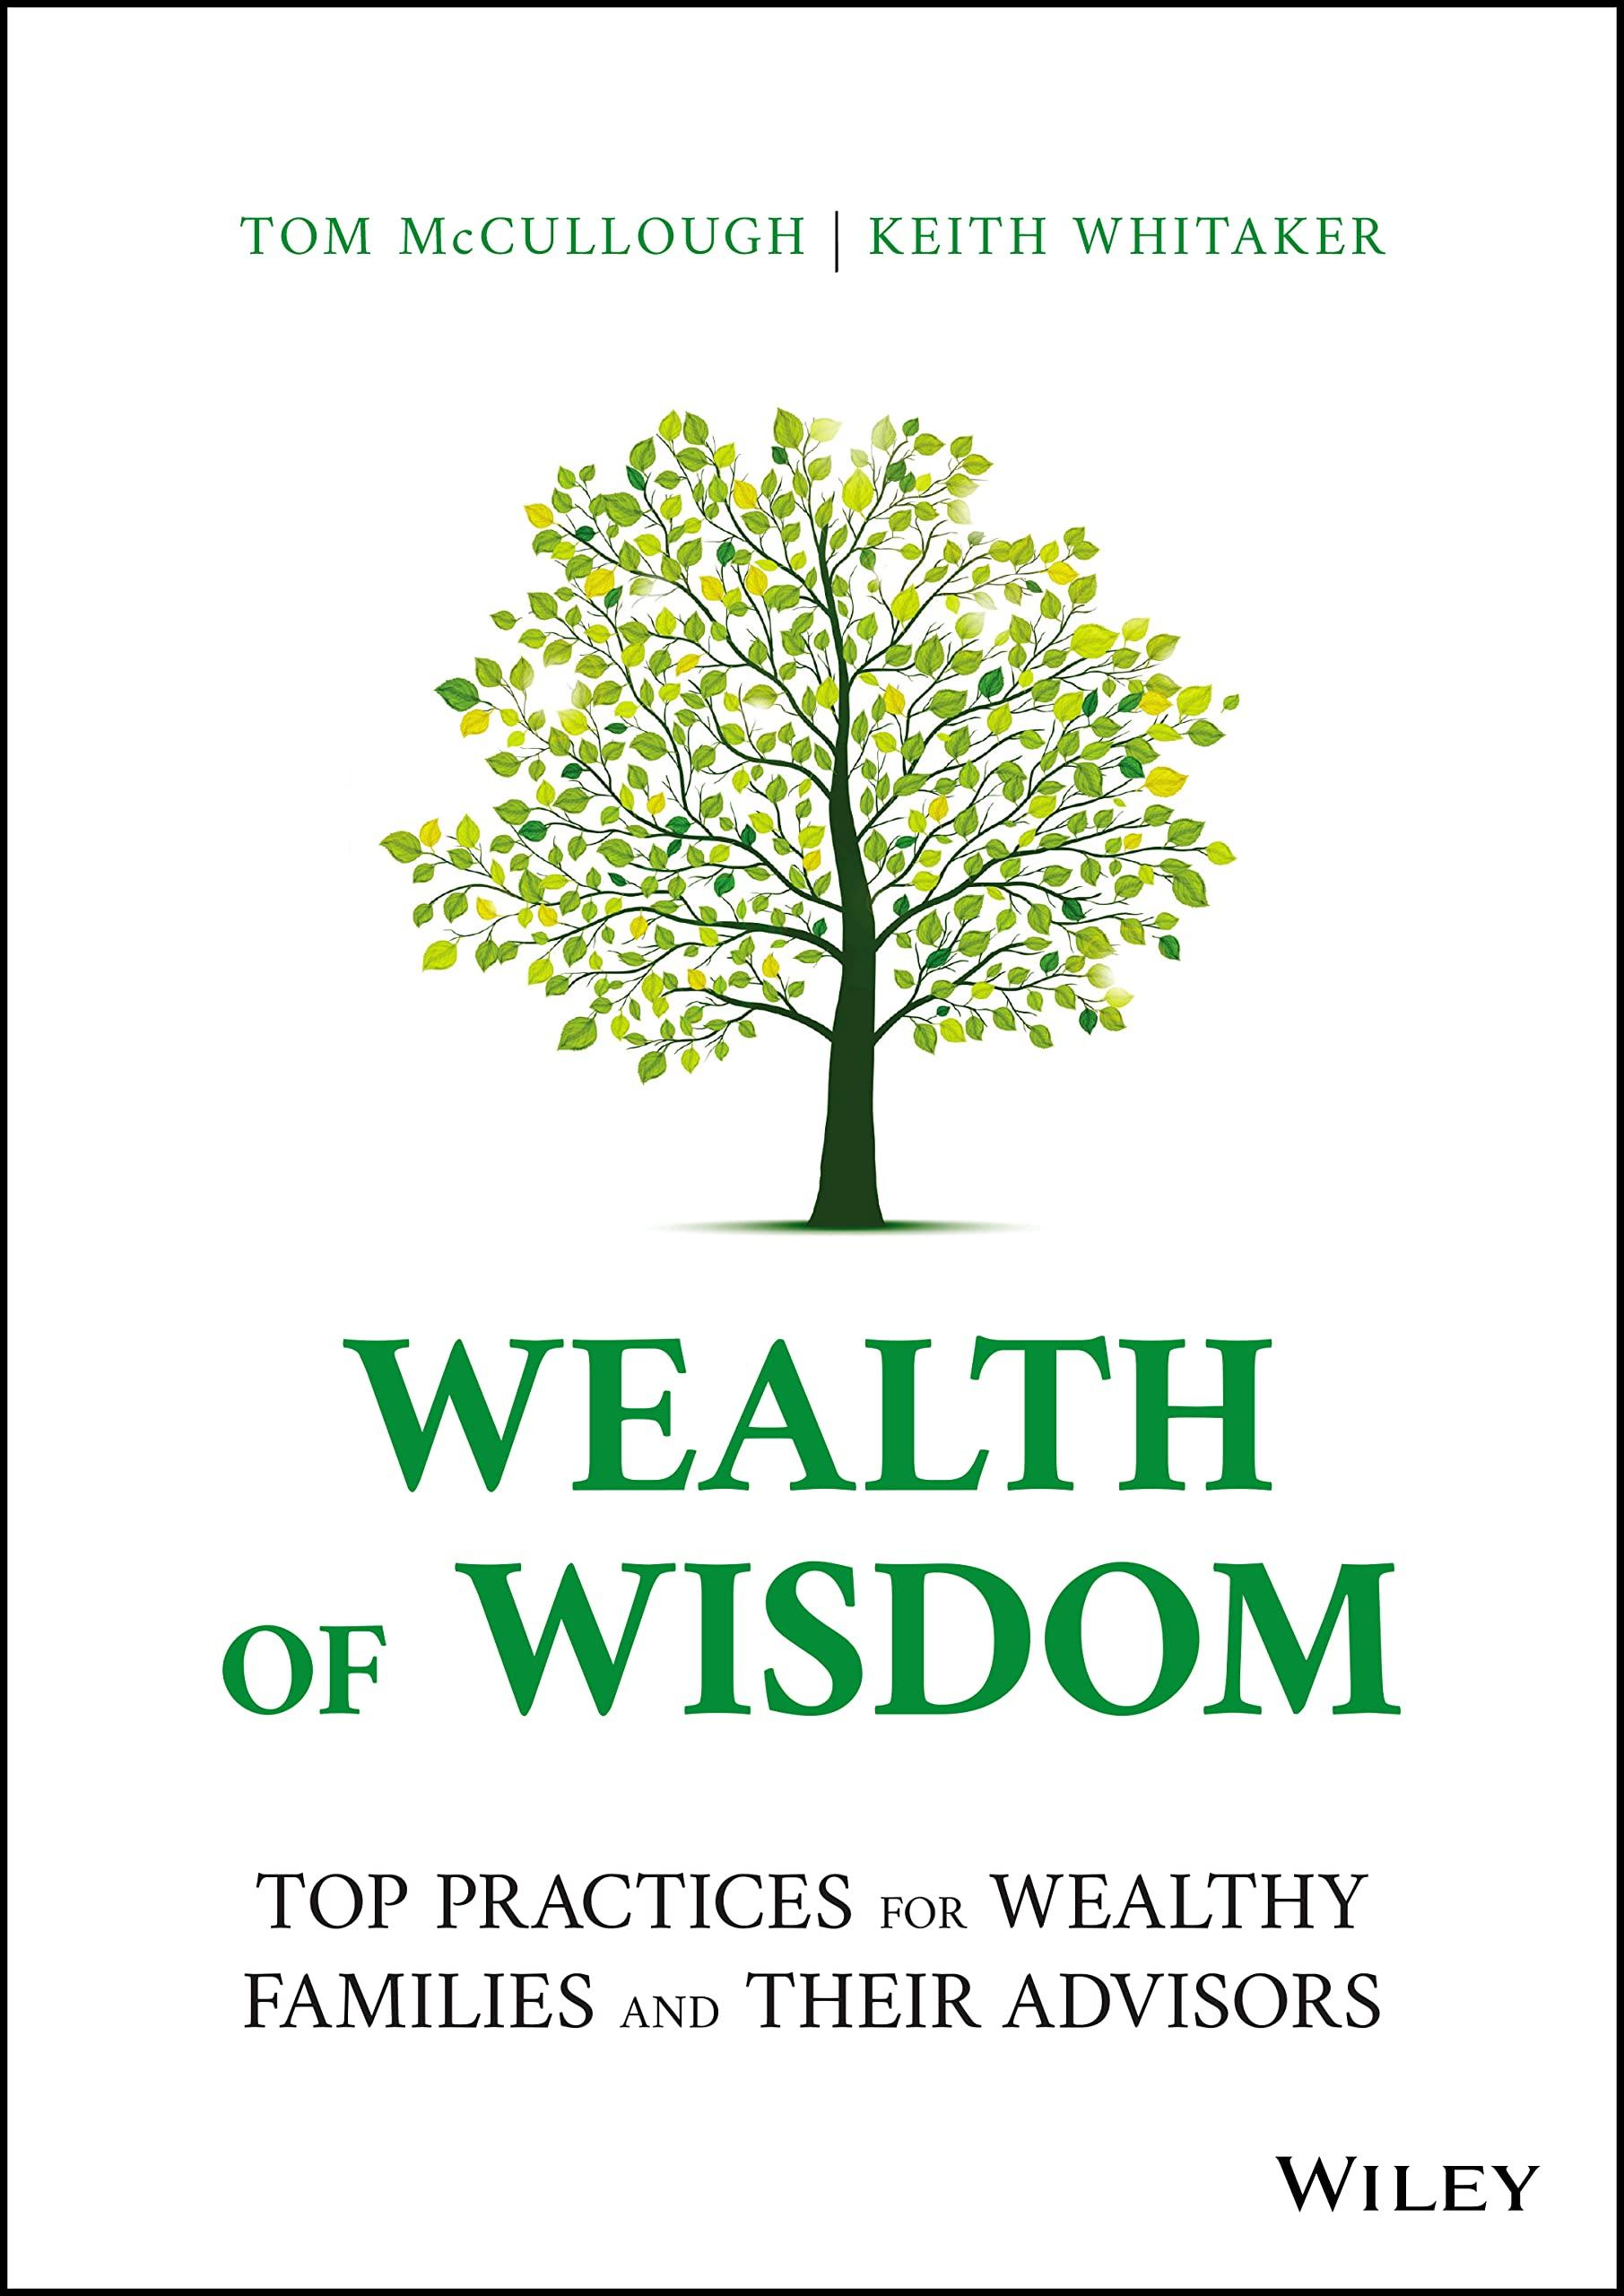 wealth of wisdom top practices for wealthy families and their advisors 1st edition tom mccullough, keith